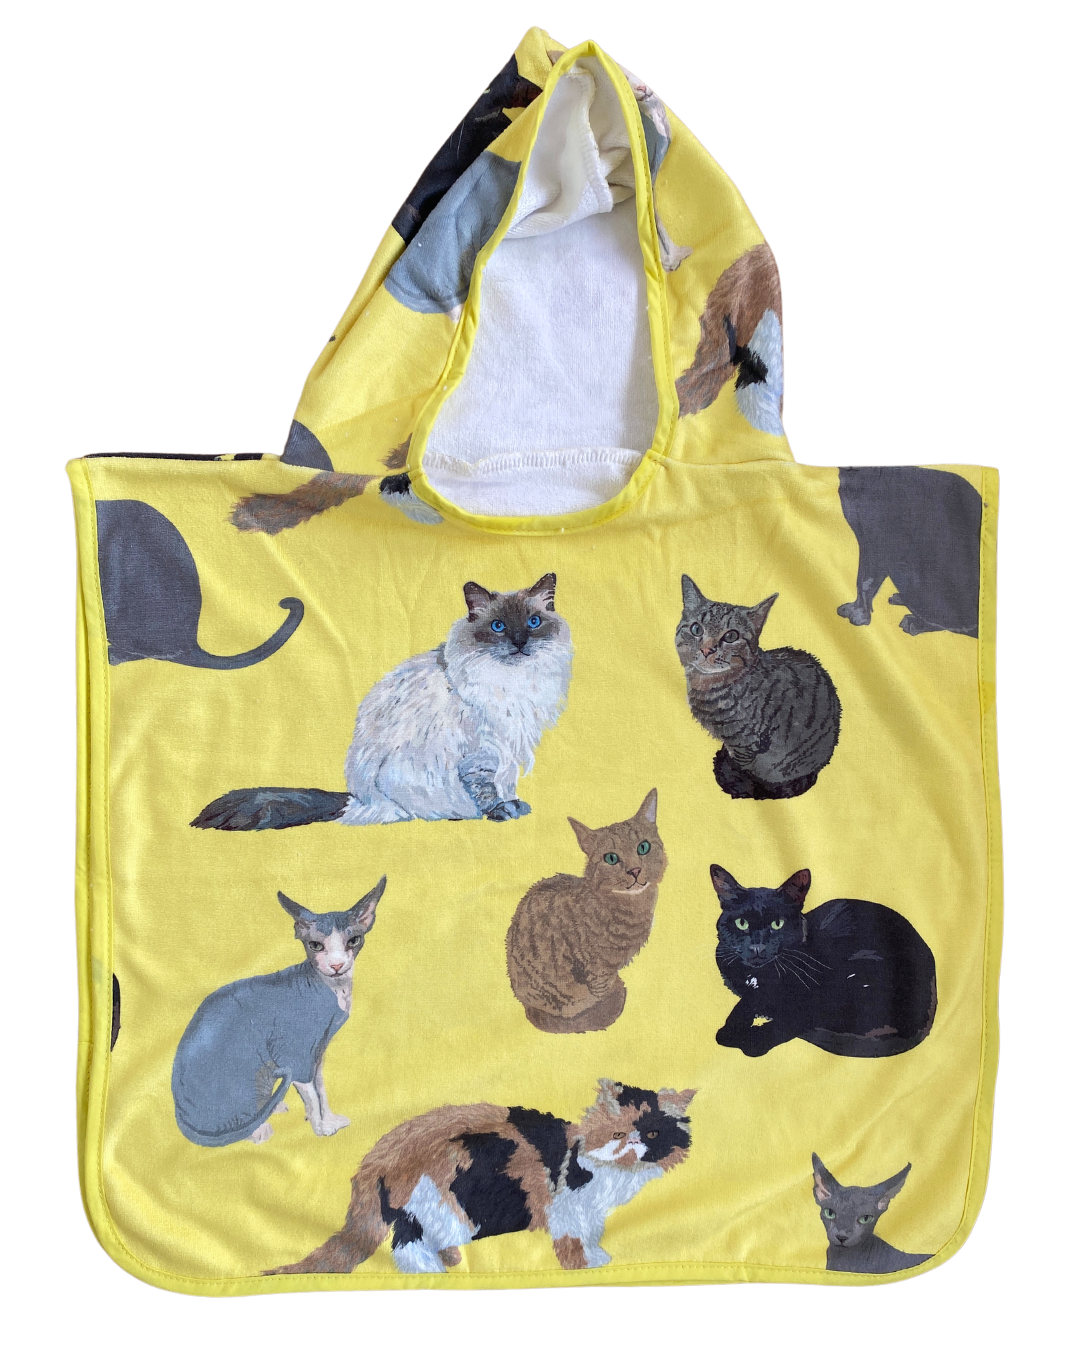 Hooded Baby Towel (0-18 months): My Cat Friends (Yellow Background)